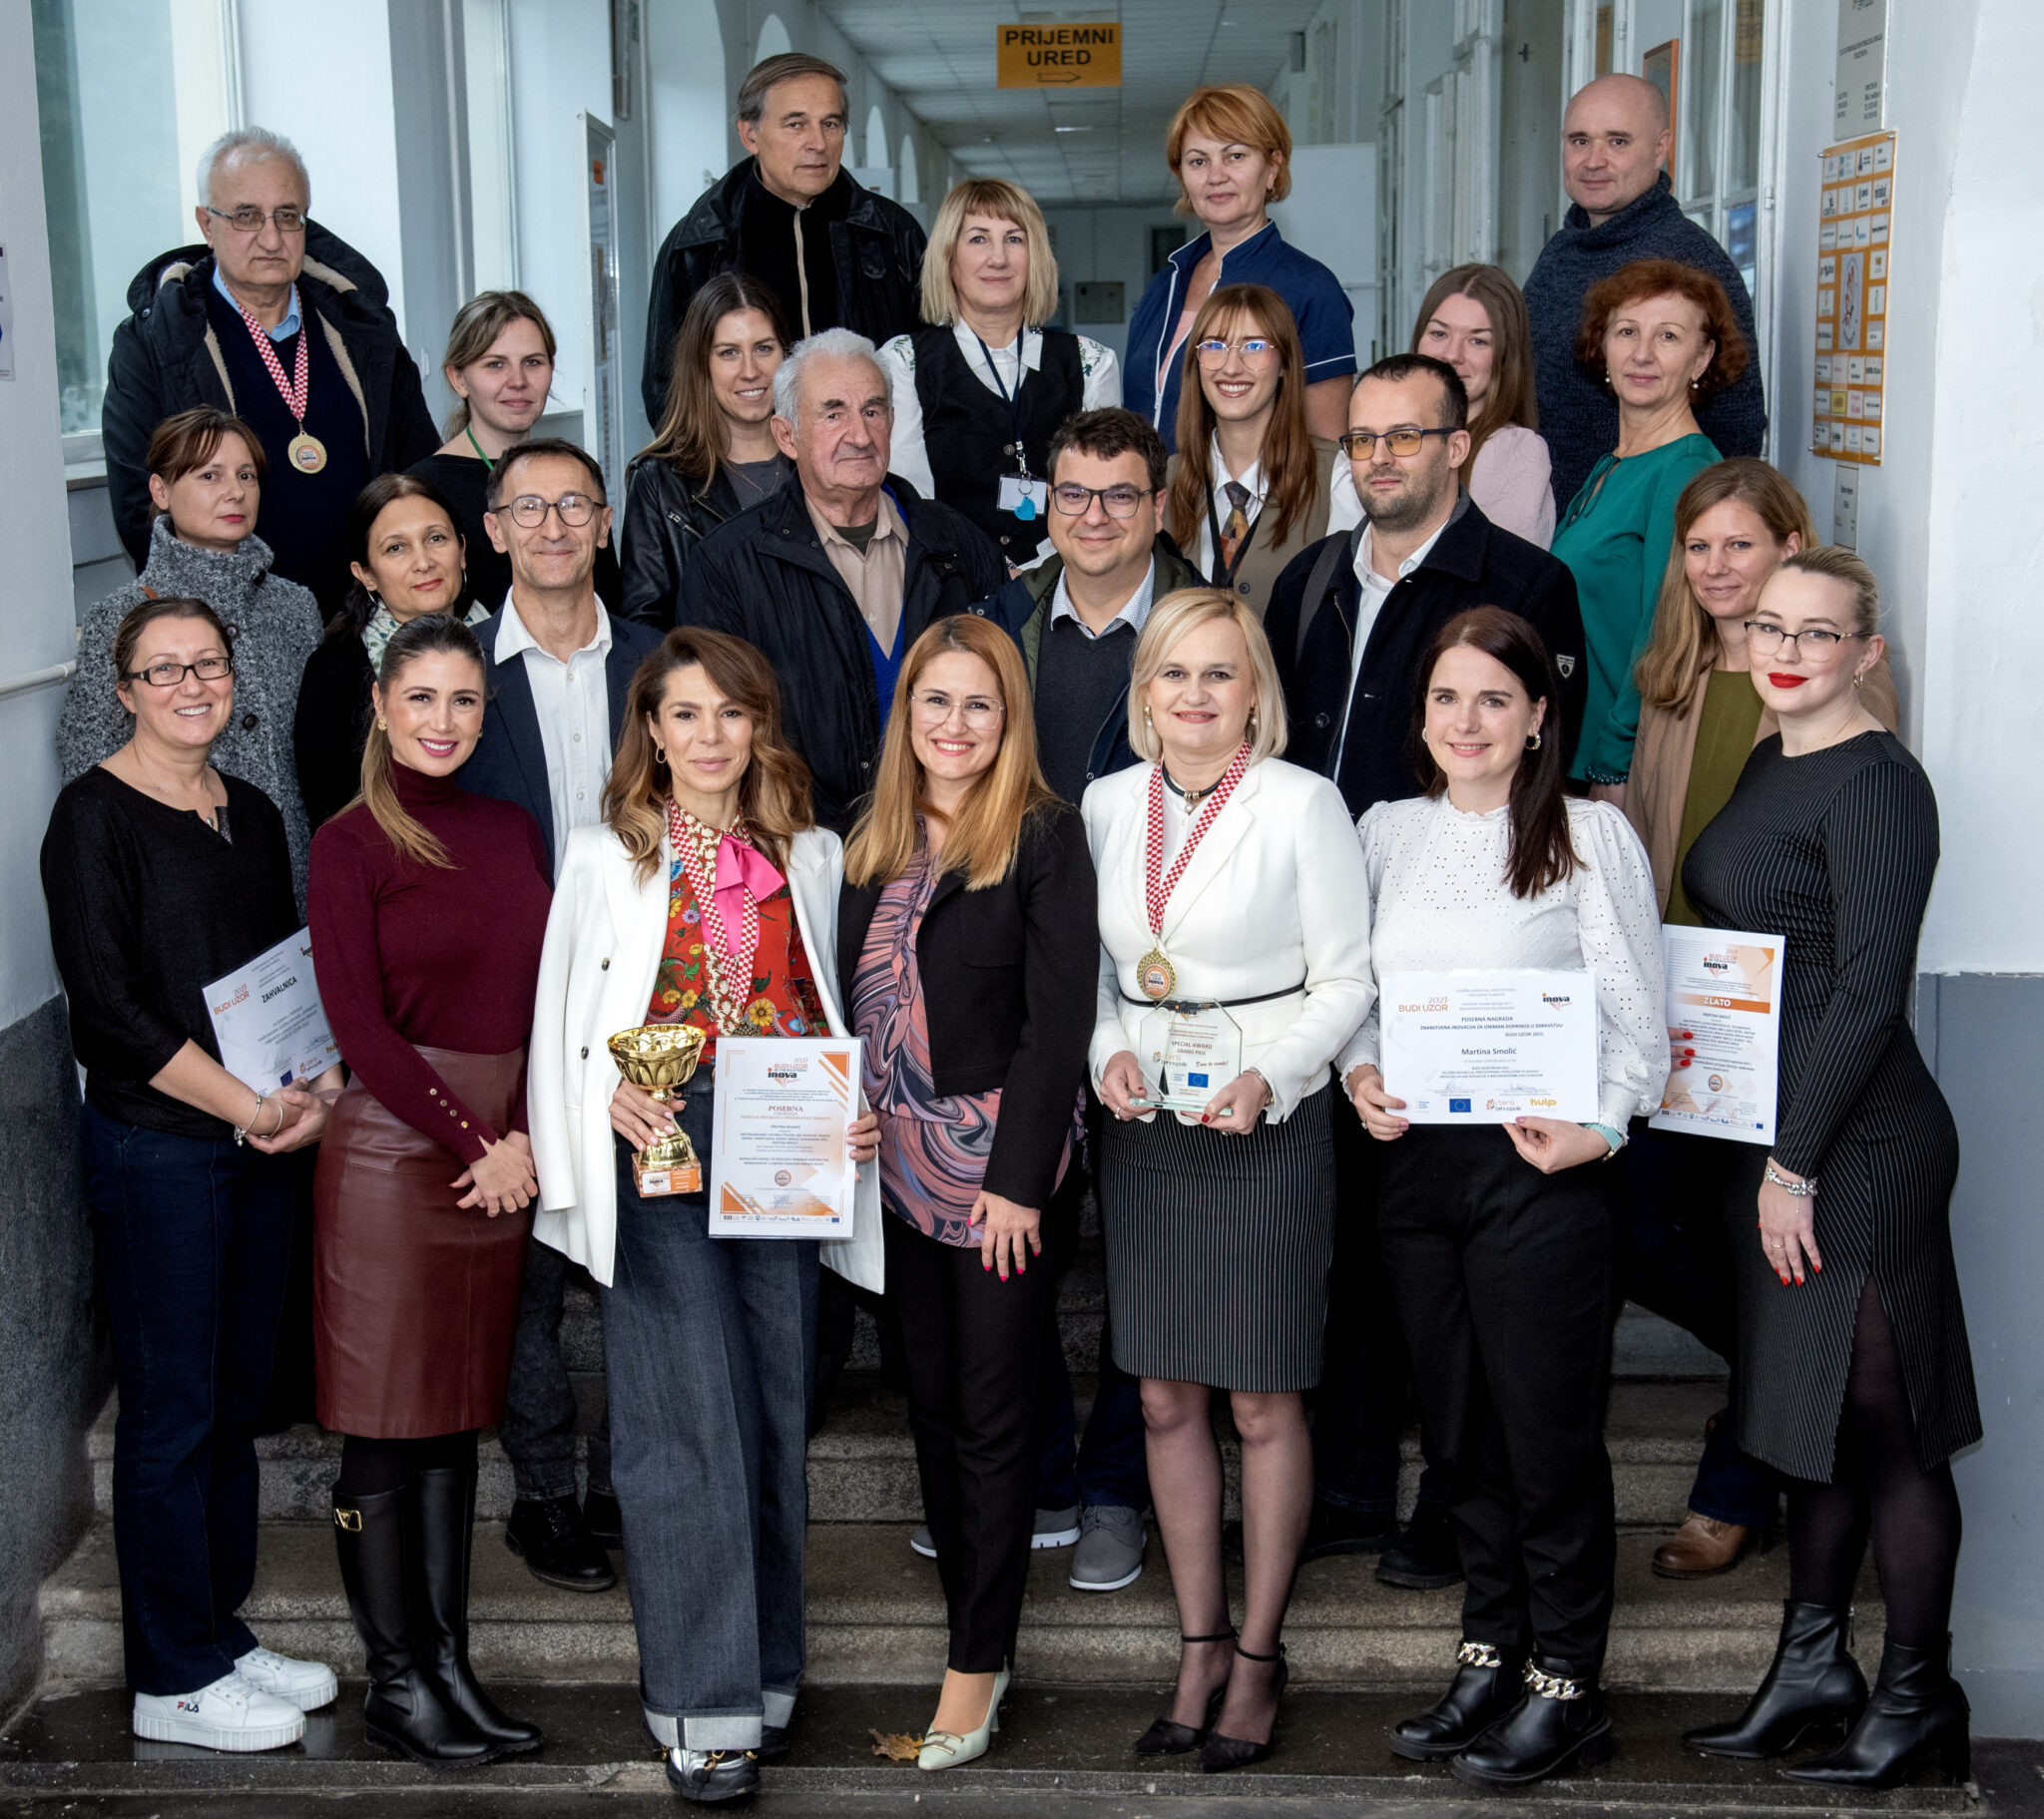 The GRAND PRIX for the best innovation in 2023 went to the team from the Faculty of Dental Medicine and Health Osijek